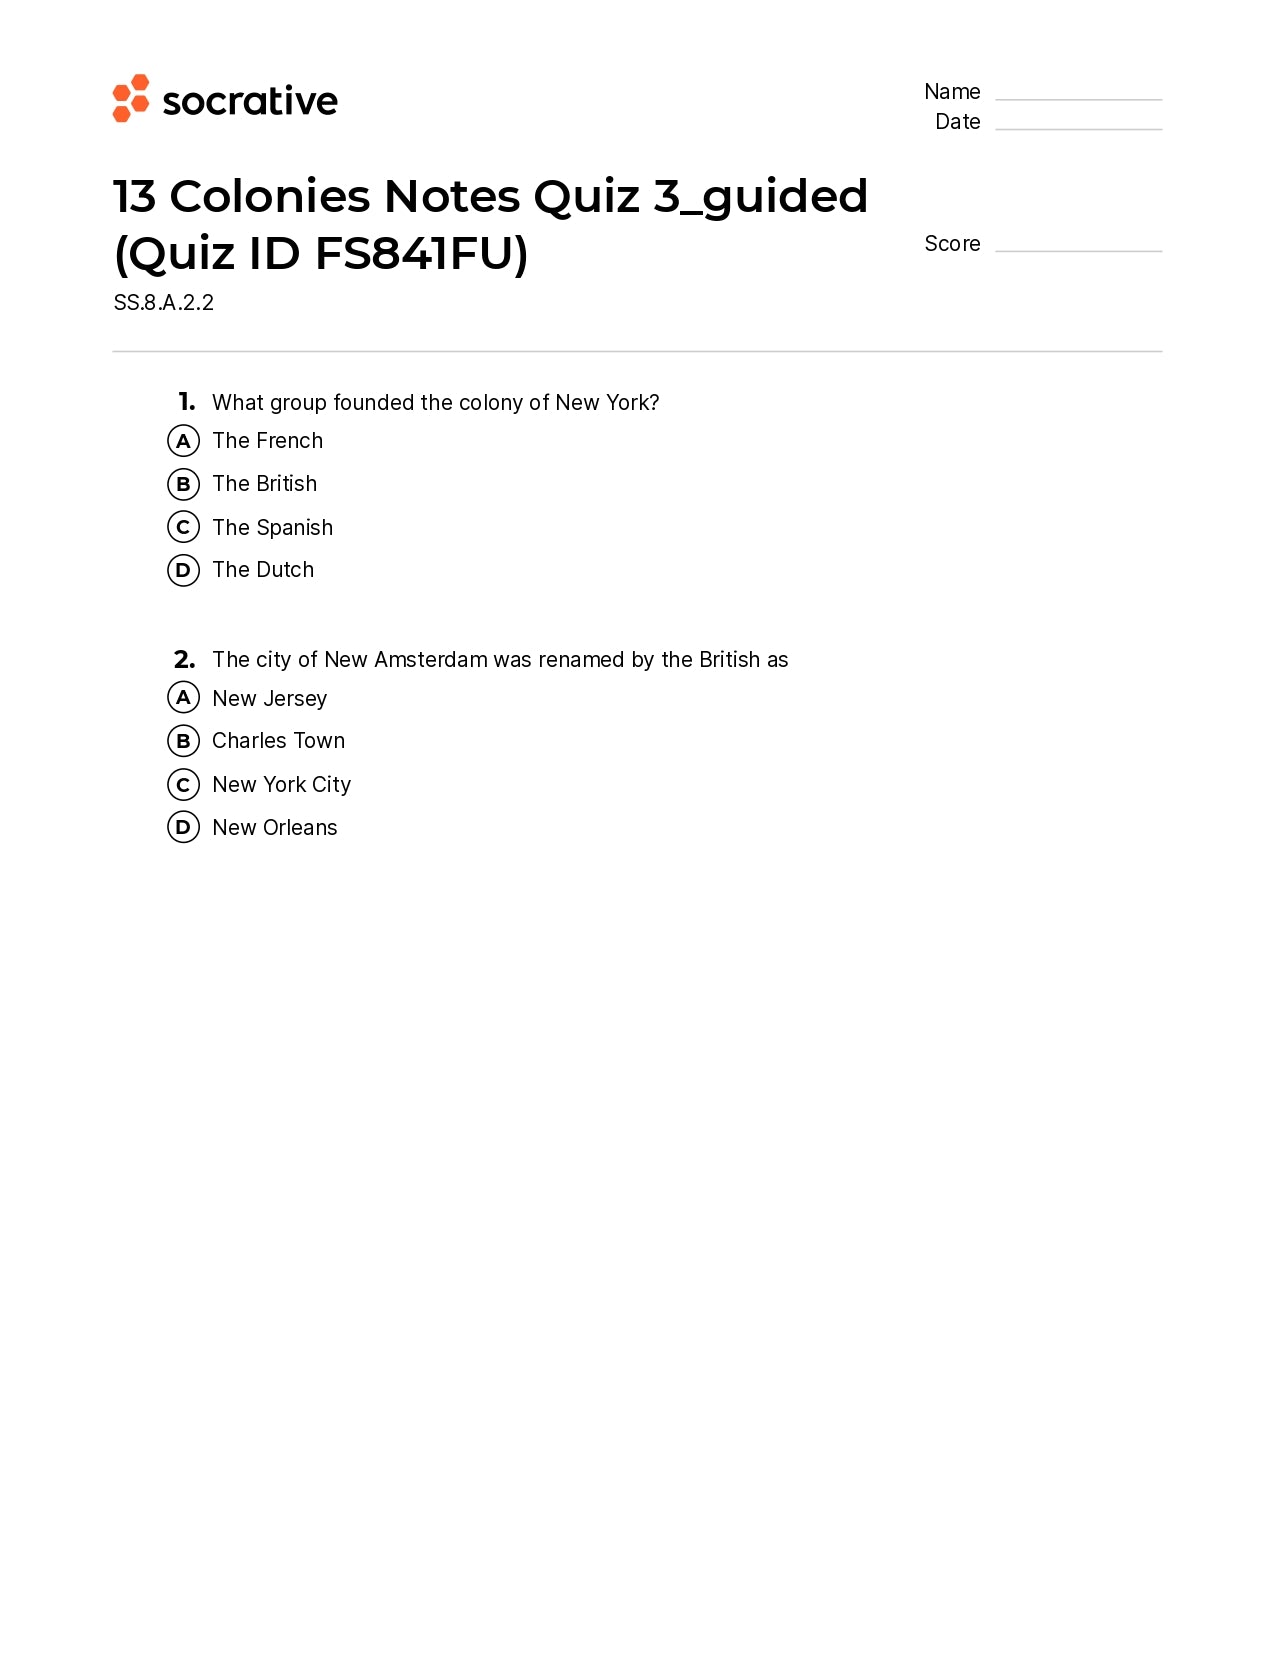 13 Colonies Notes Quiz 3_Guided